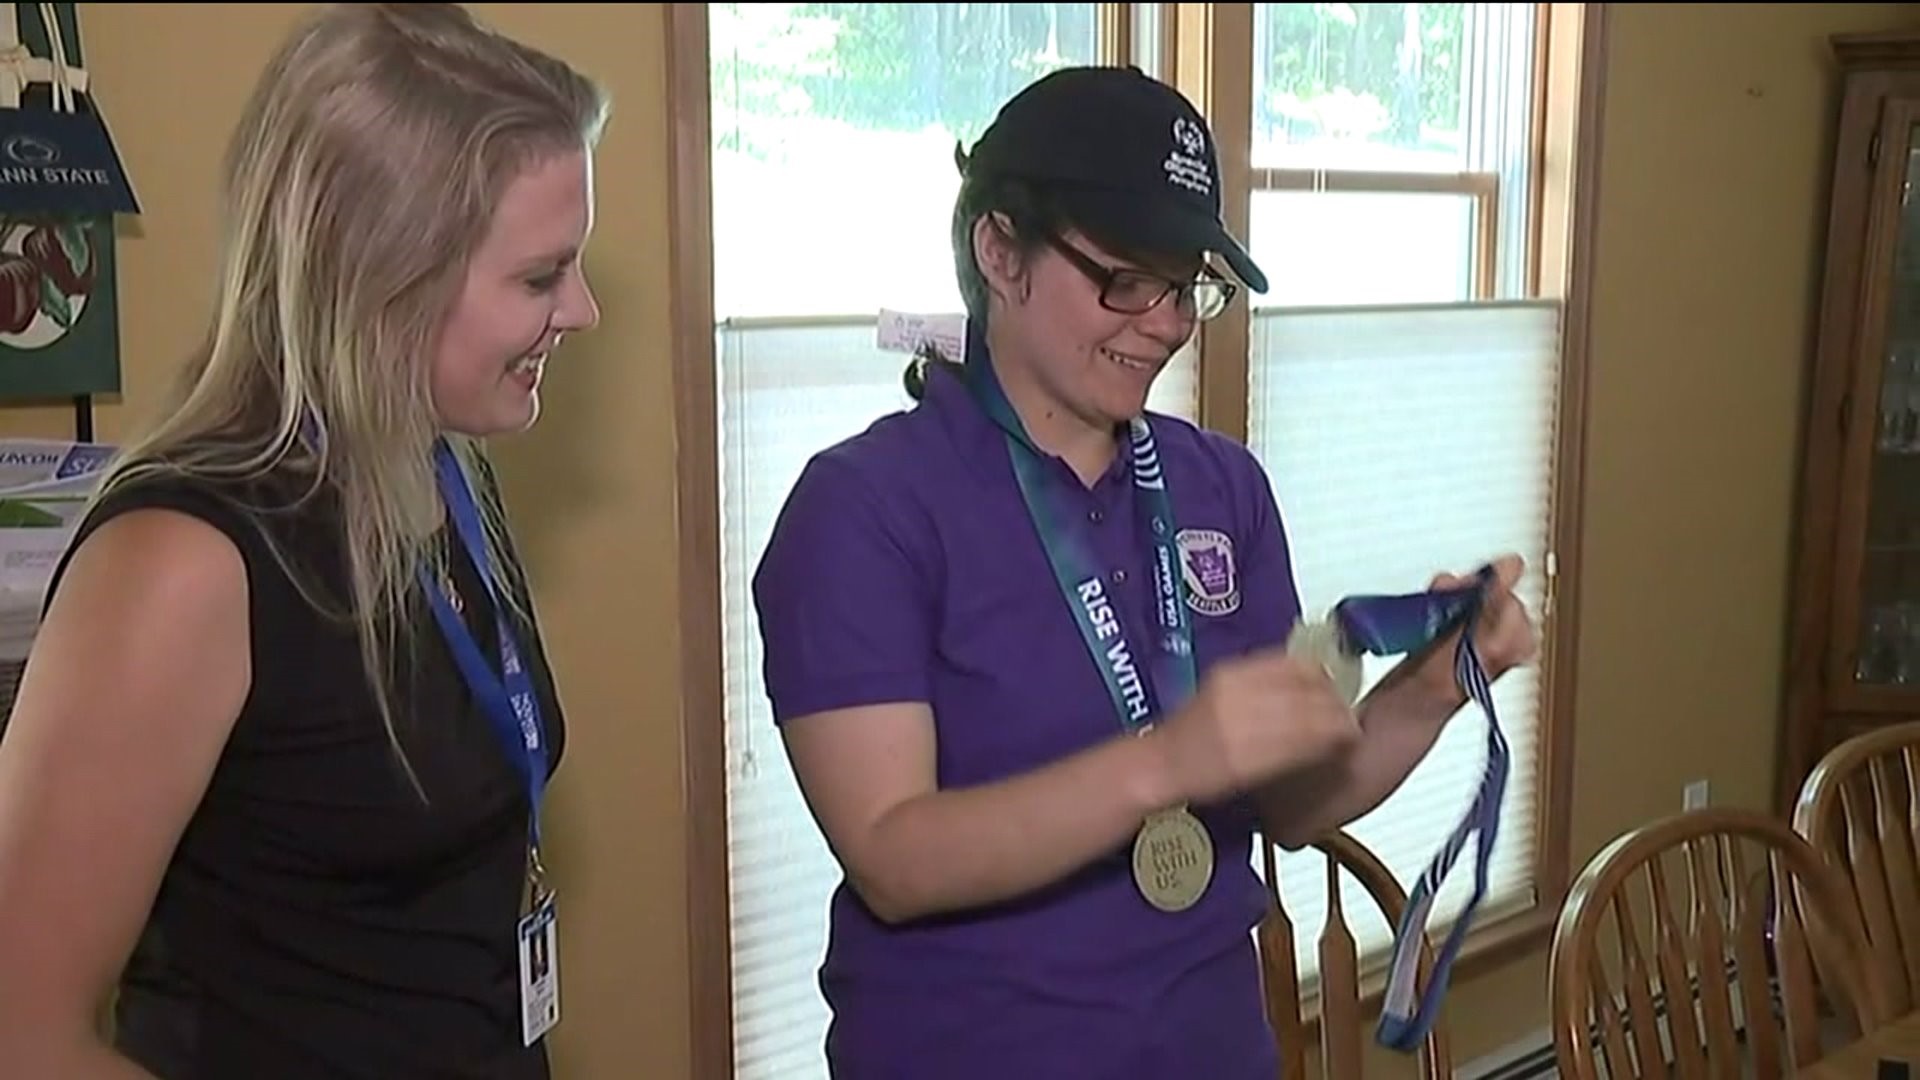 Trevorton Woman Earns 4 Silver Medals in Special Olympics